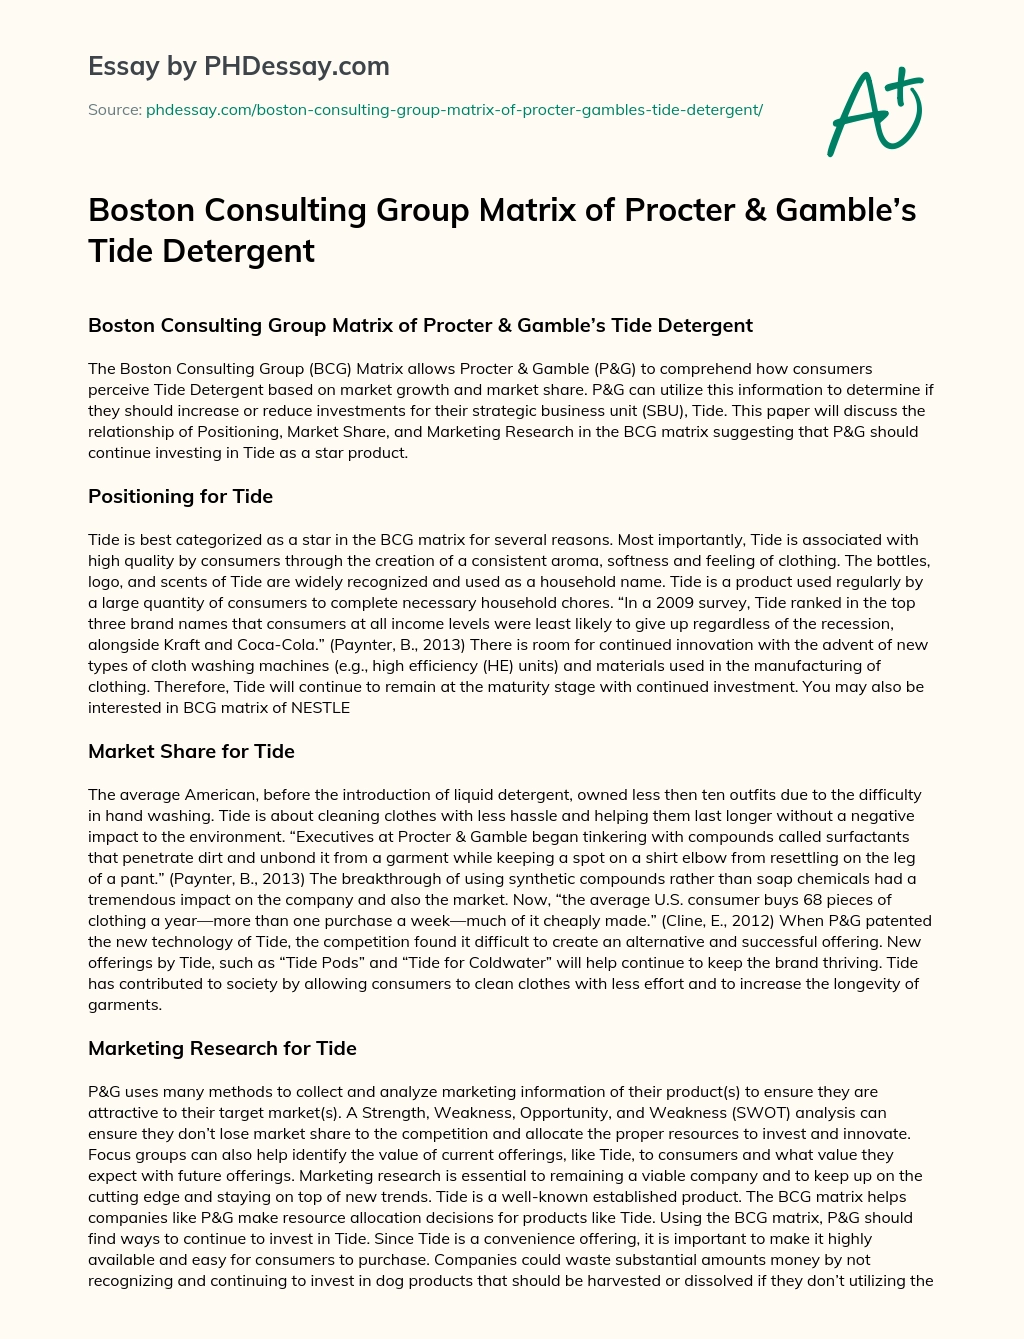 Boston Consulting Group Matrix of Procter & Gamble’s Tide Detergent essay